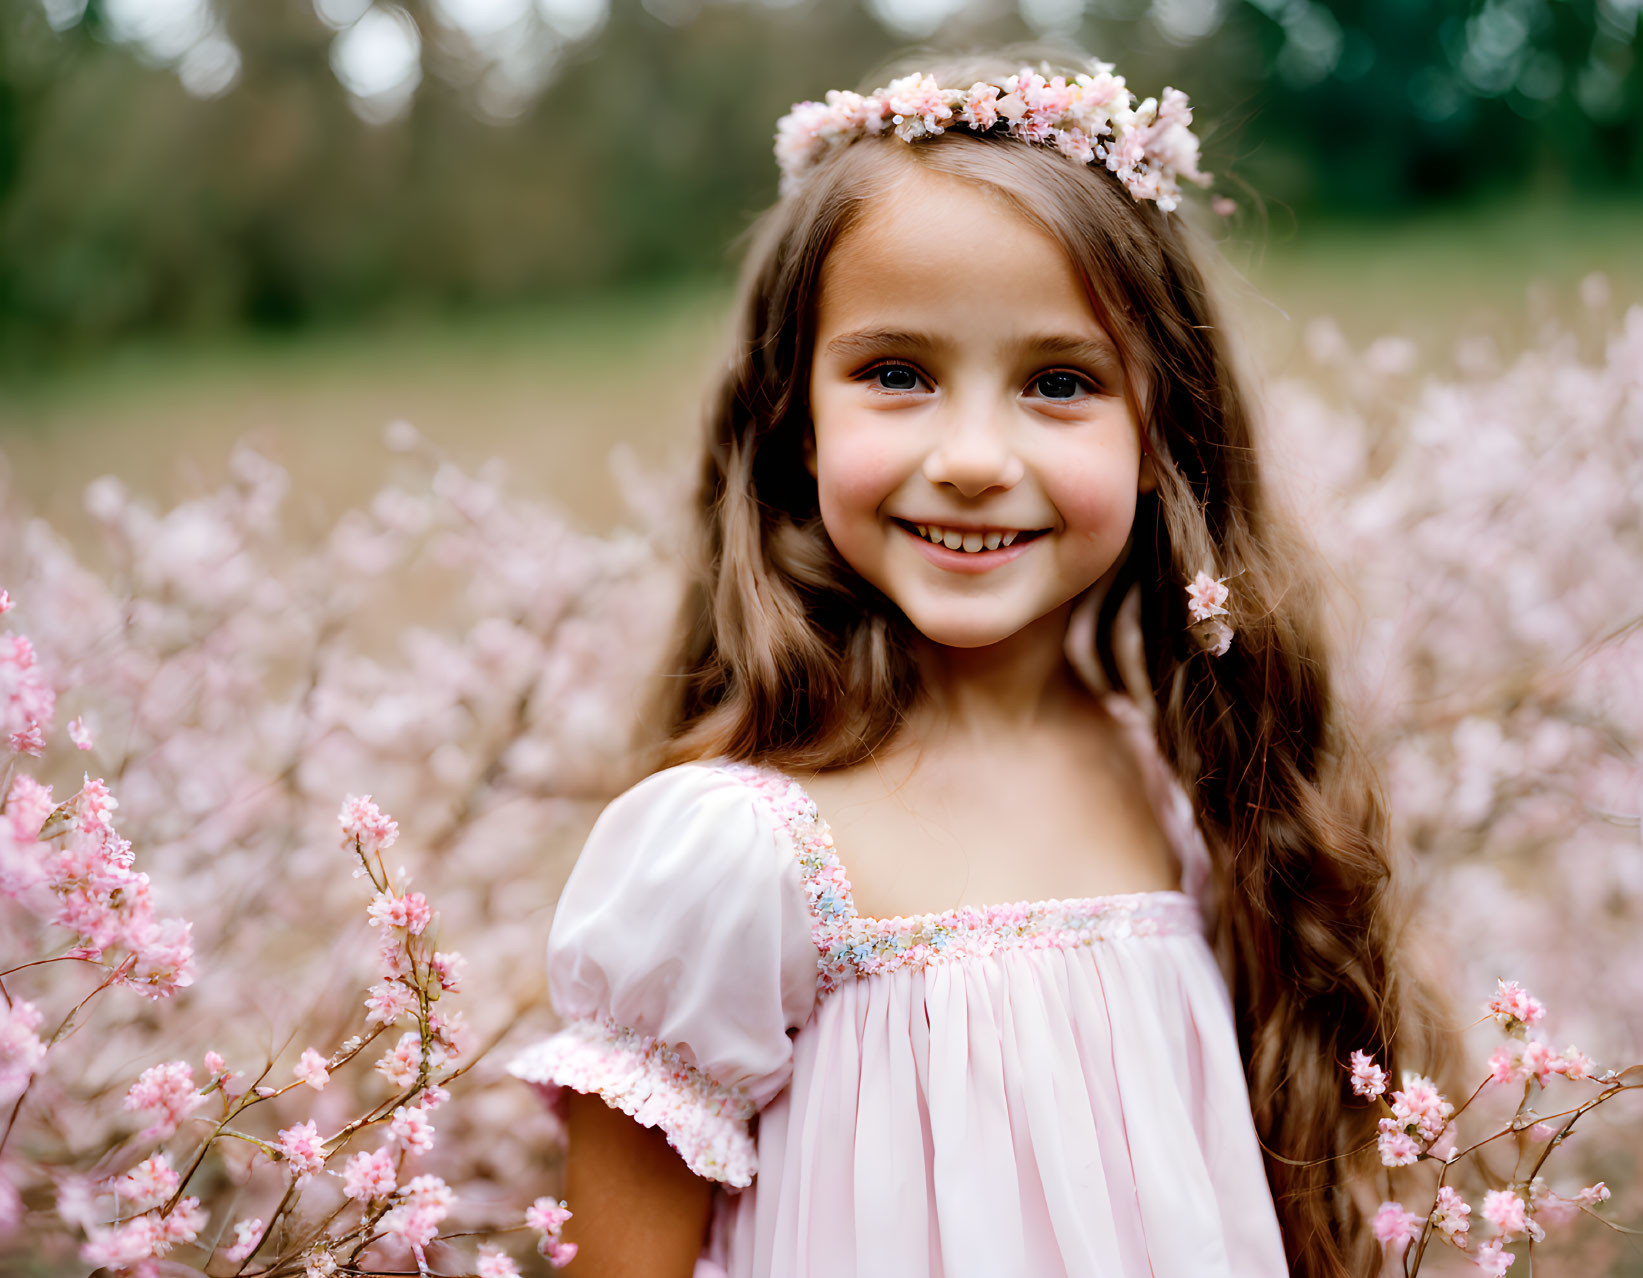 Young girl with floral headband in pink flower field smiling in pink dress